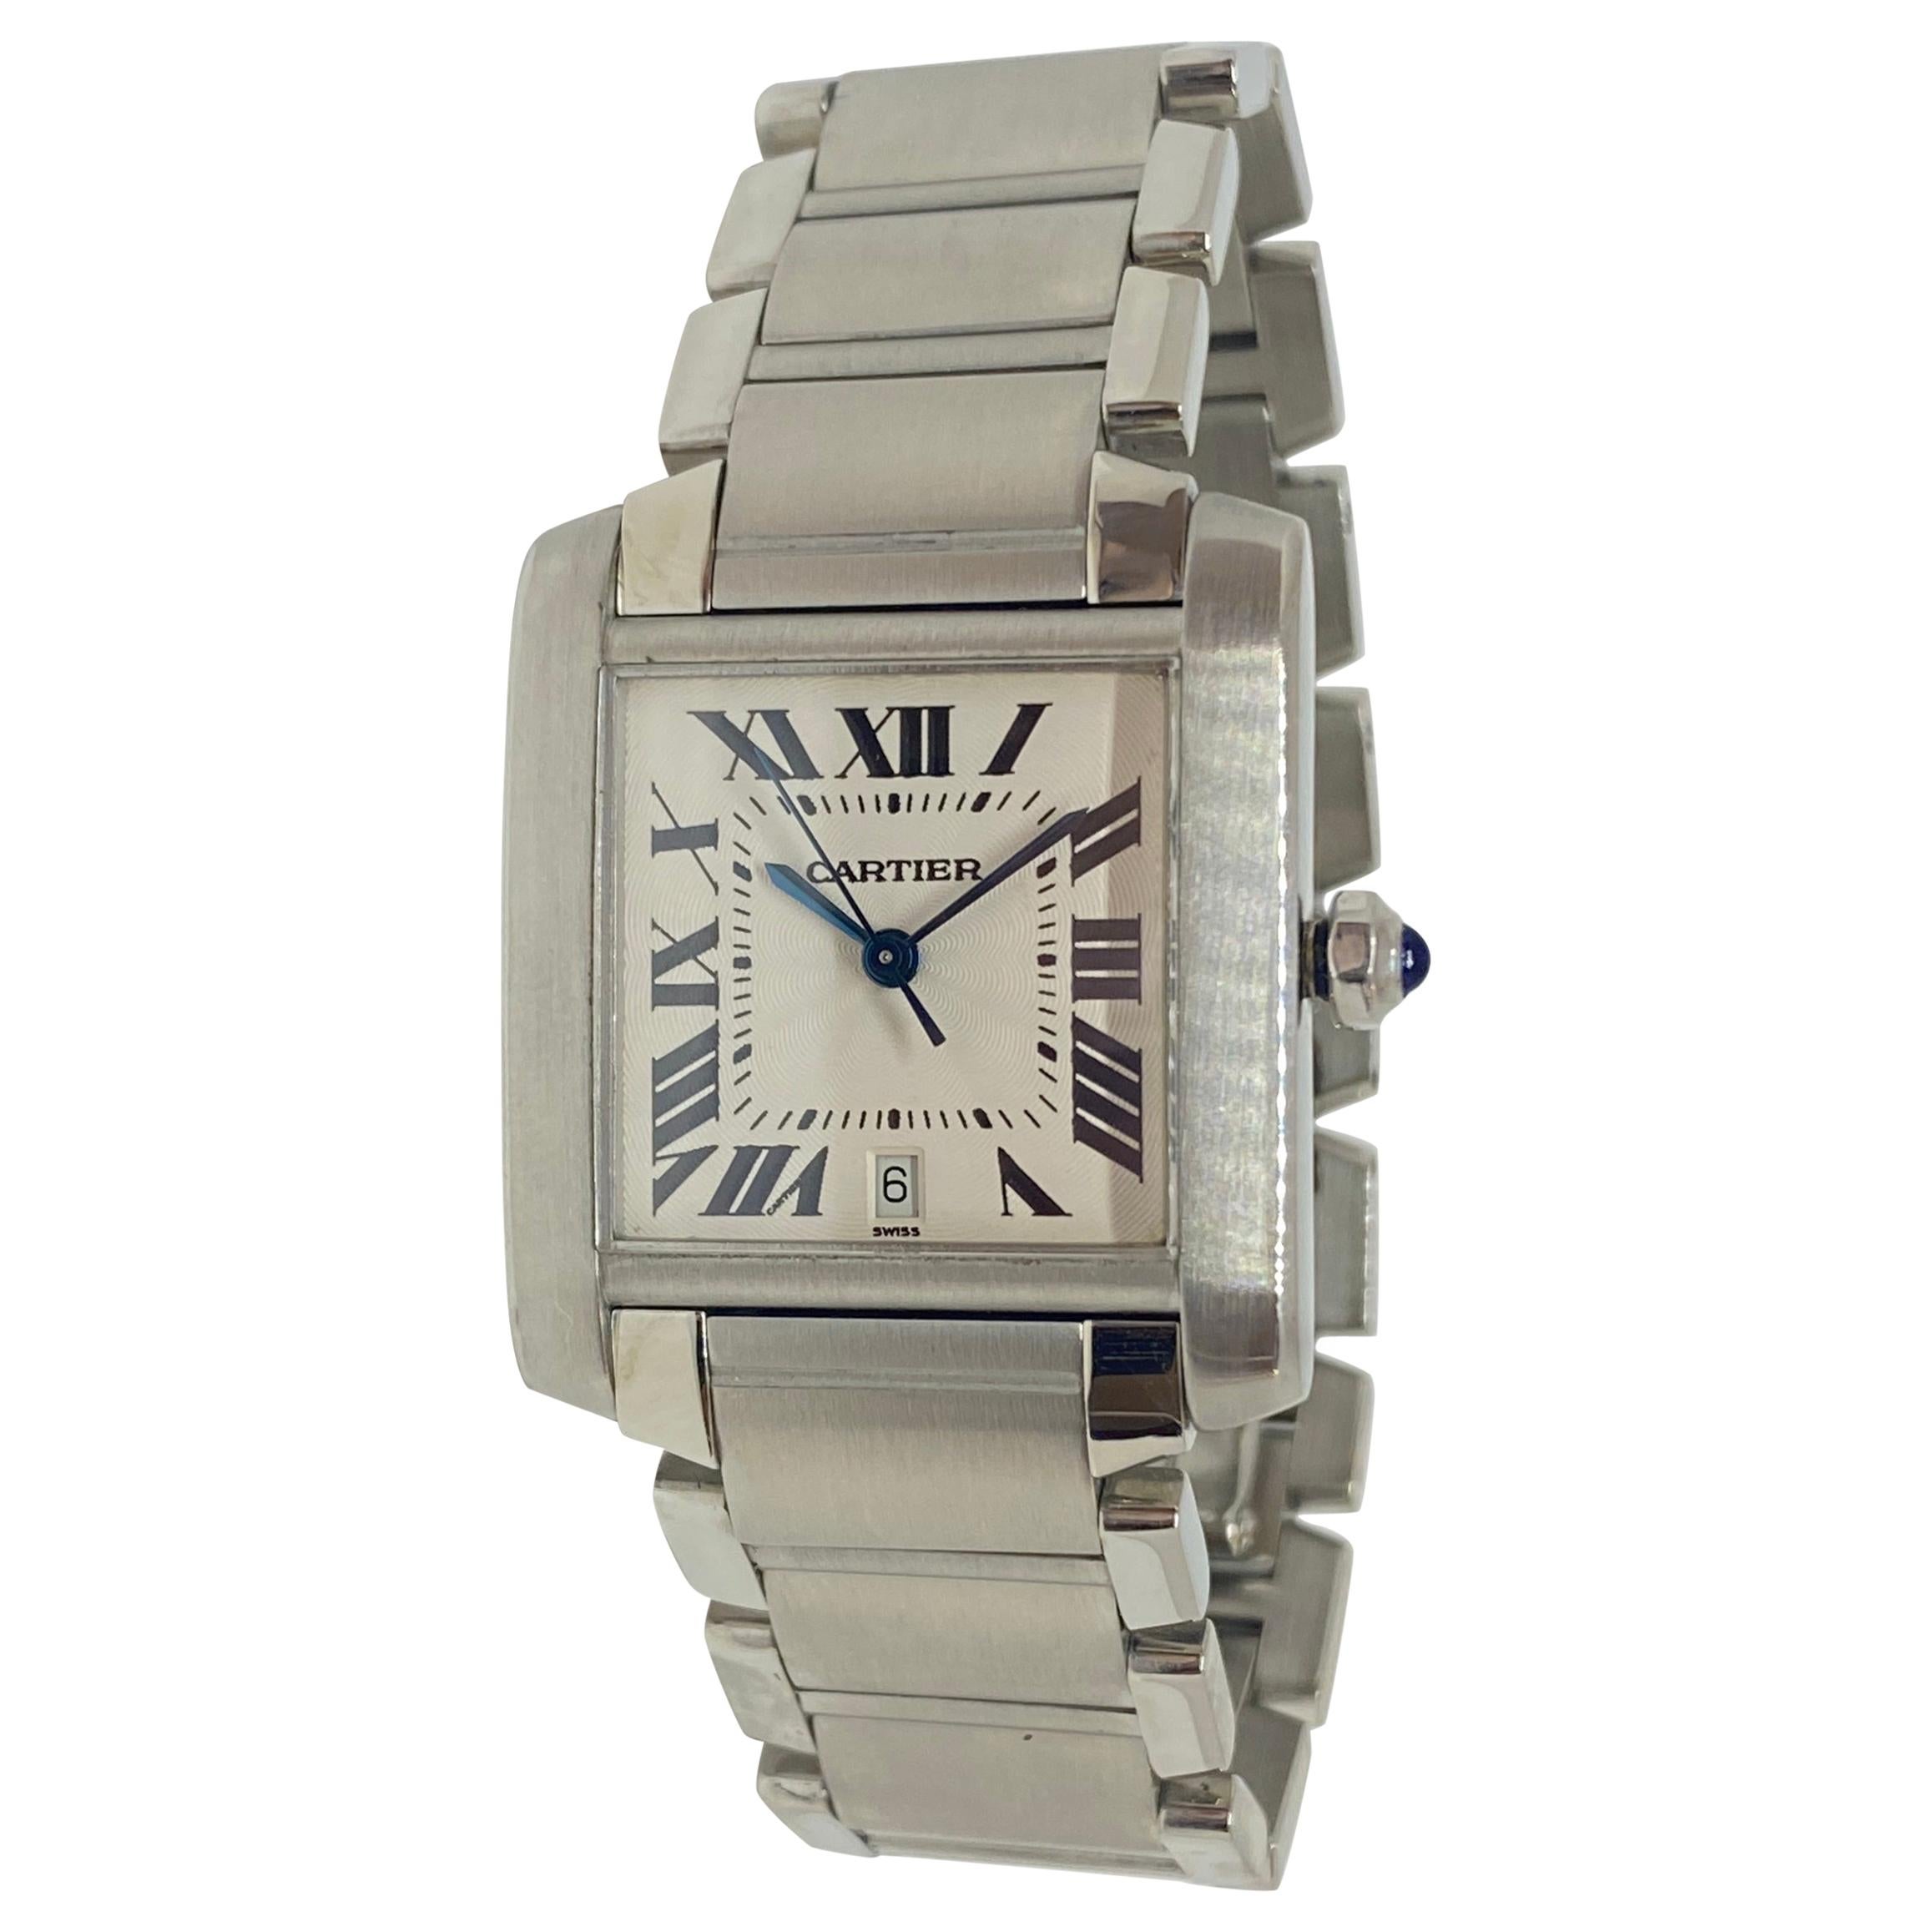 cartier automatic 2302 price